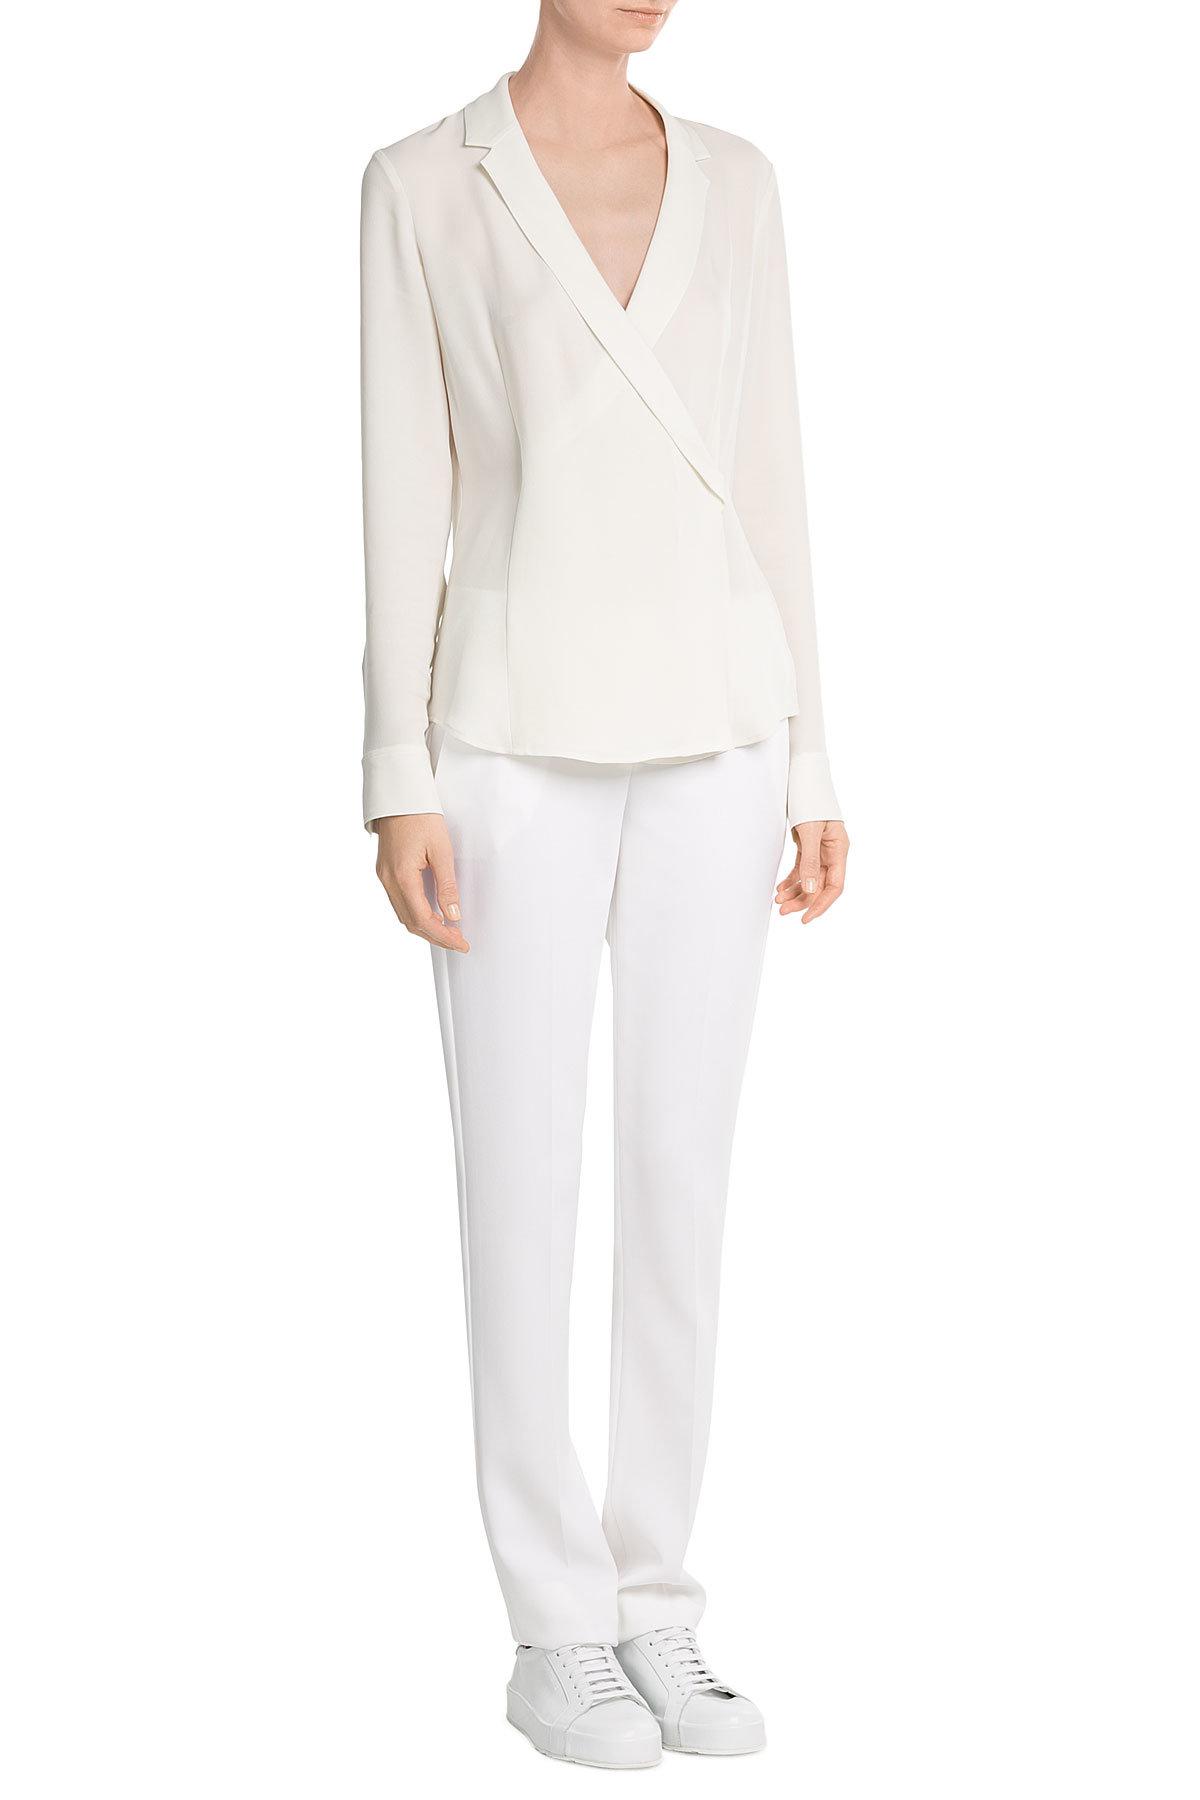 Theory Silk Wrap Blouse in White - Lyst